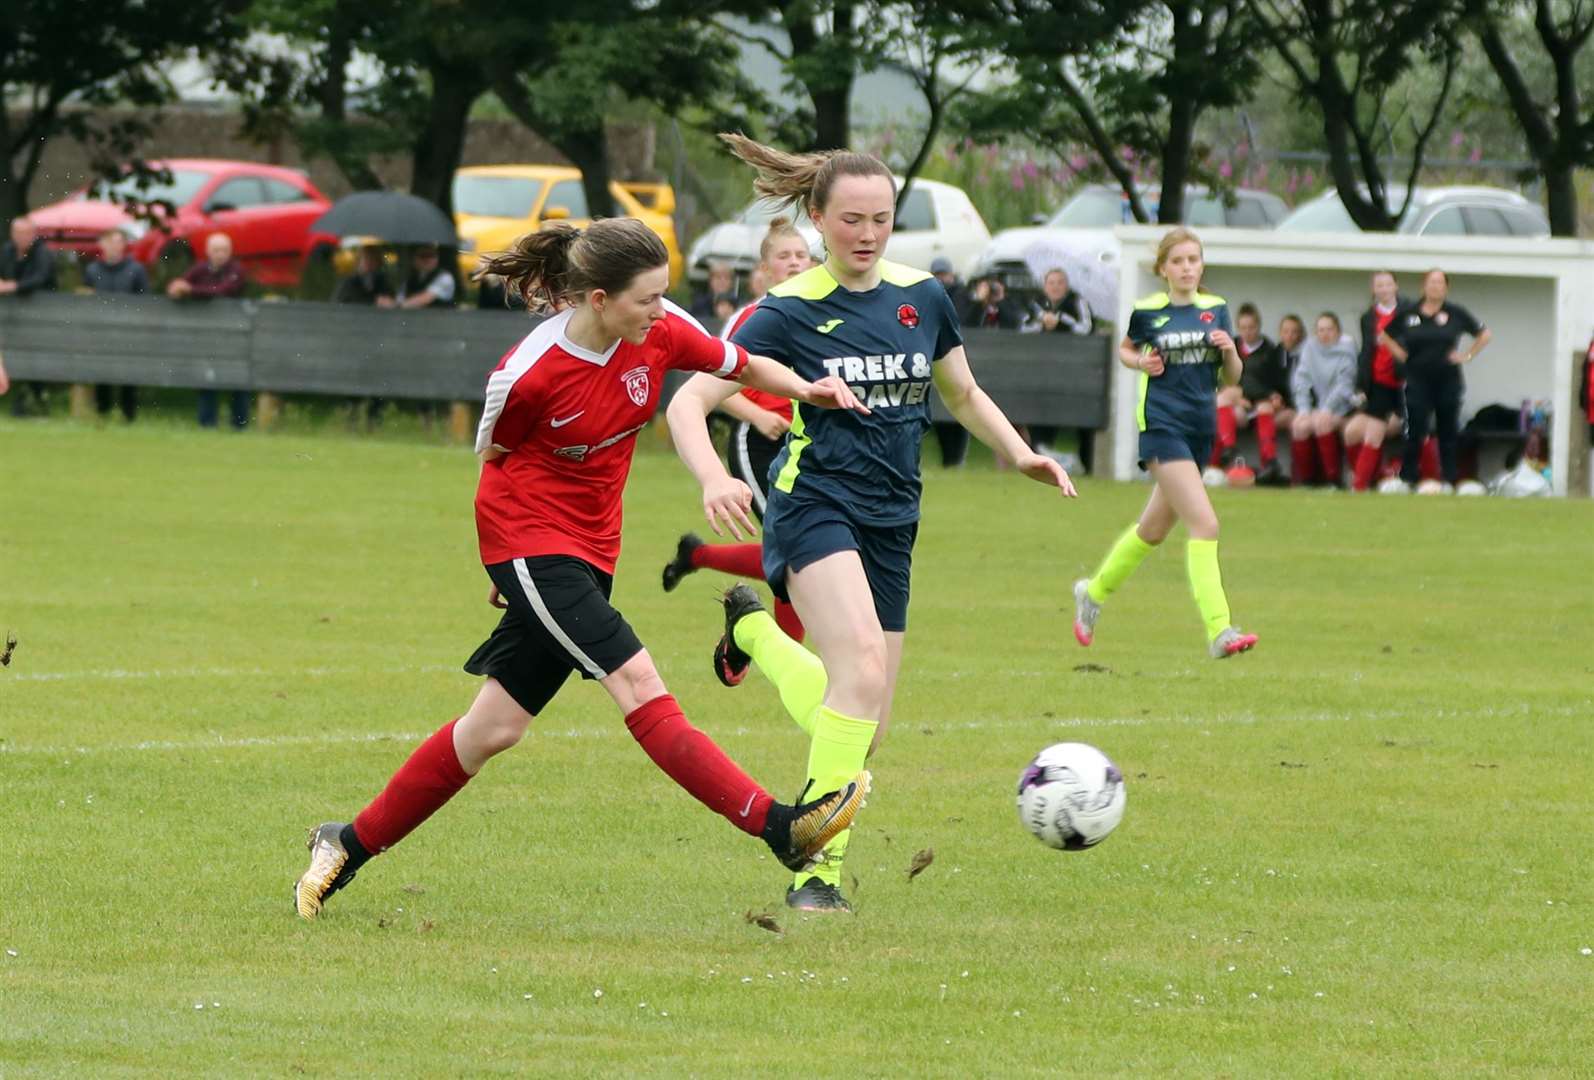 Caithness striker Carly Erridge fires in the fourth goal to complete Sunday's win against Orkney in Thurso. Picture: James Gunn